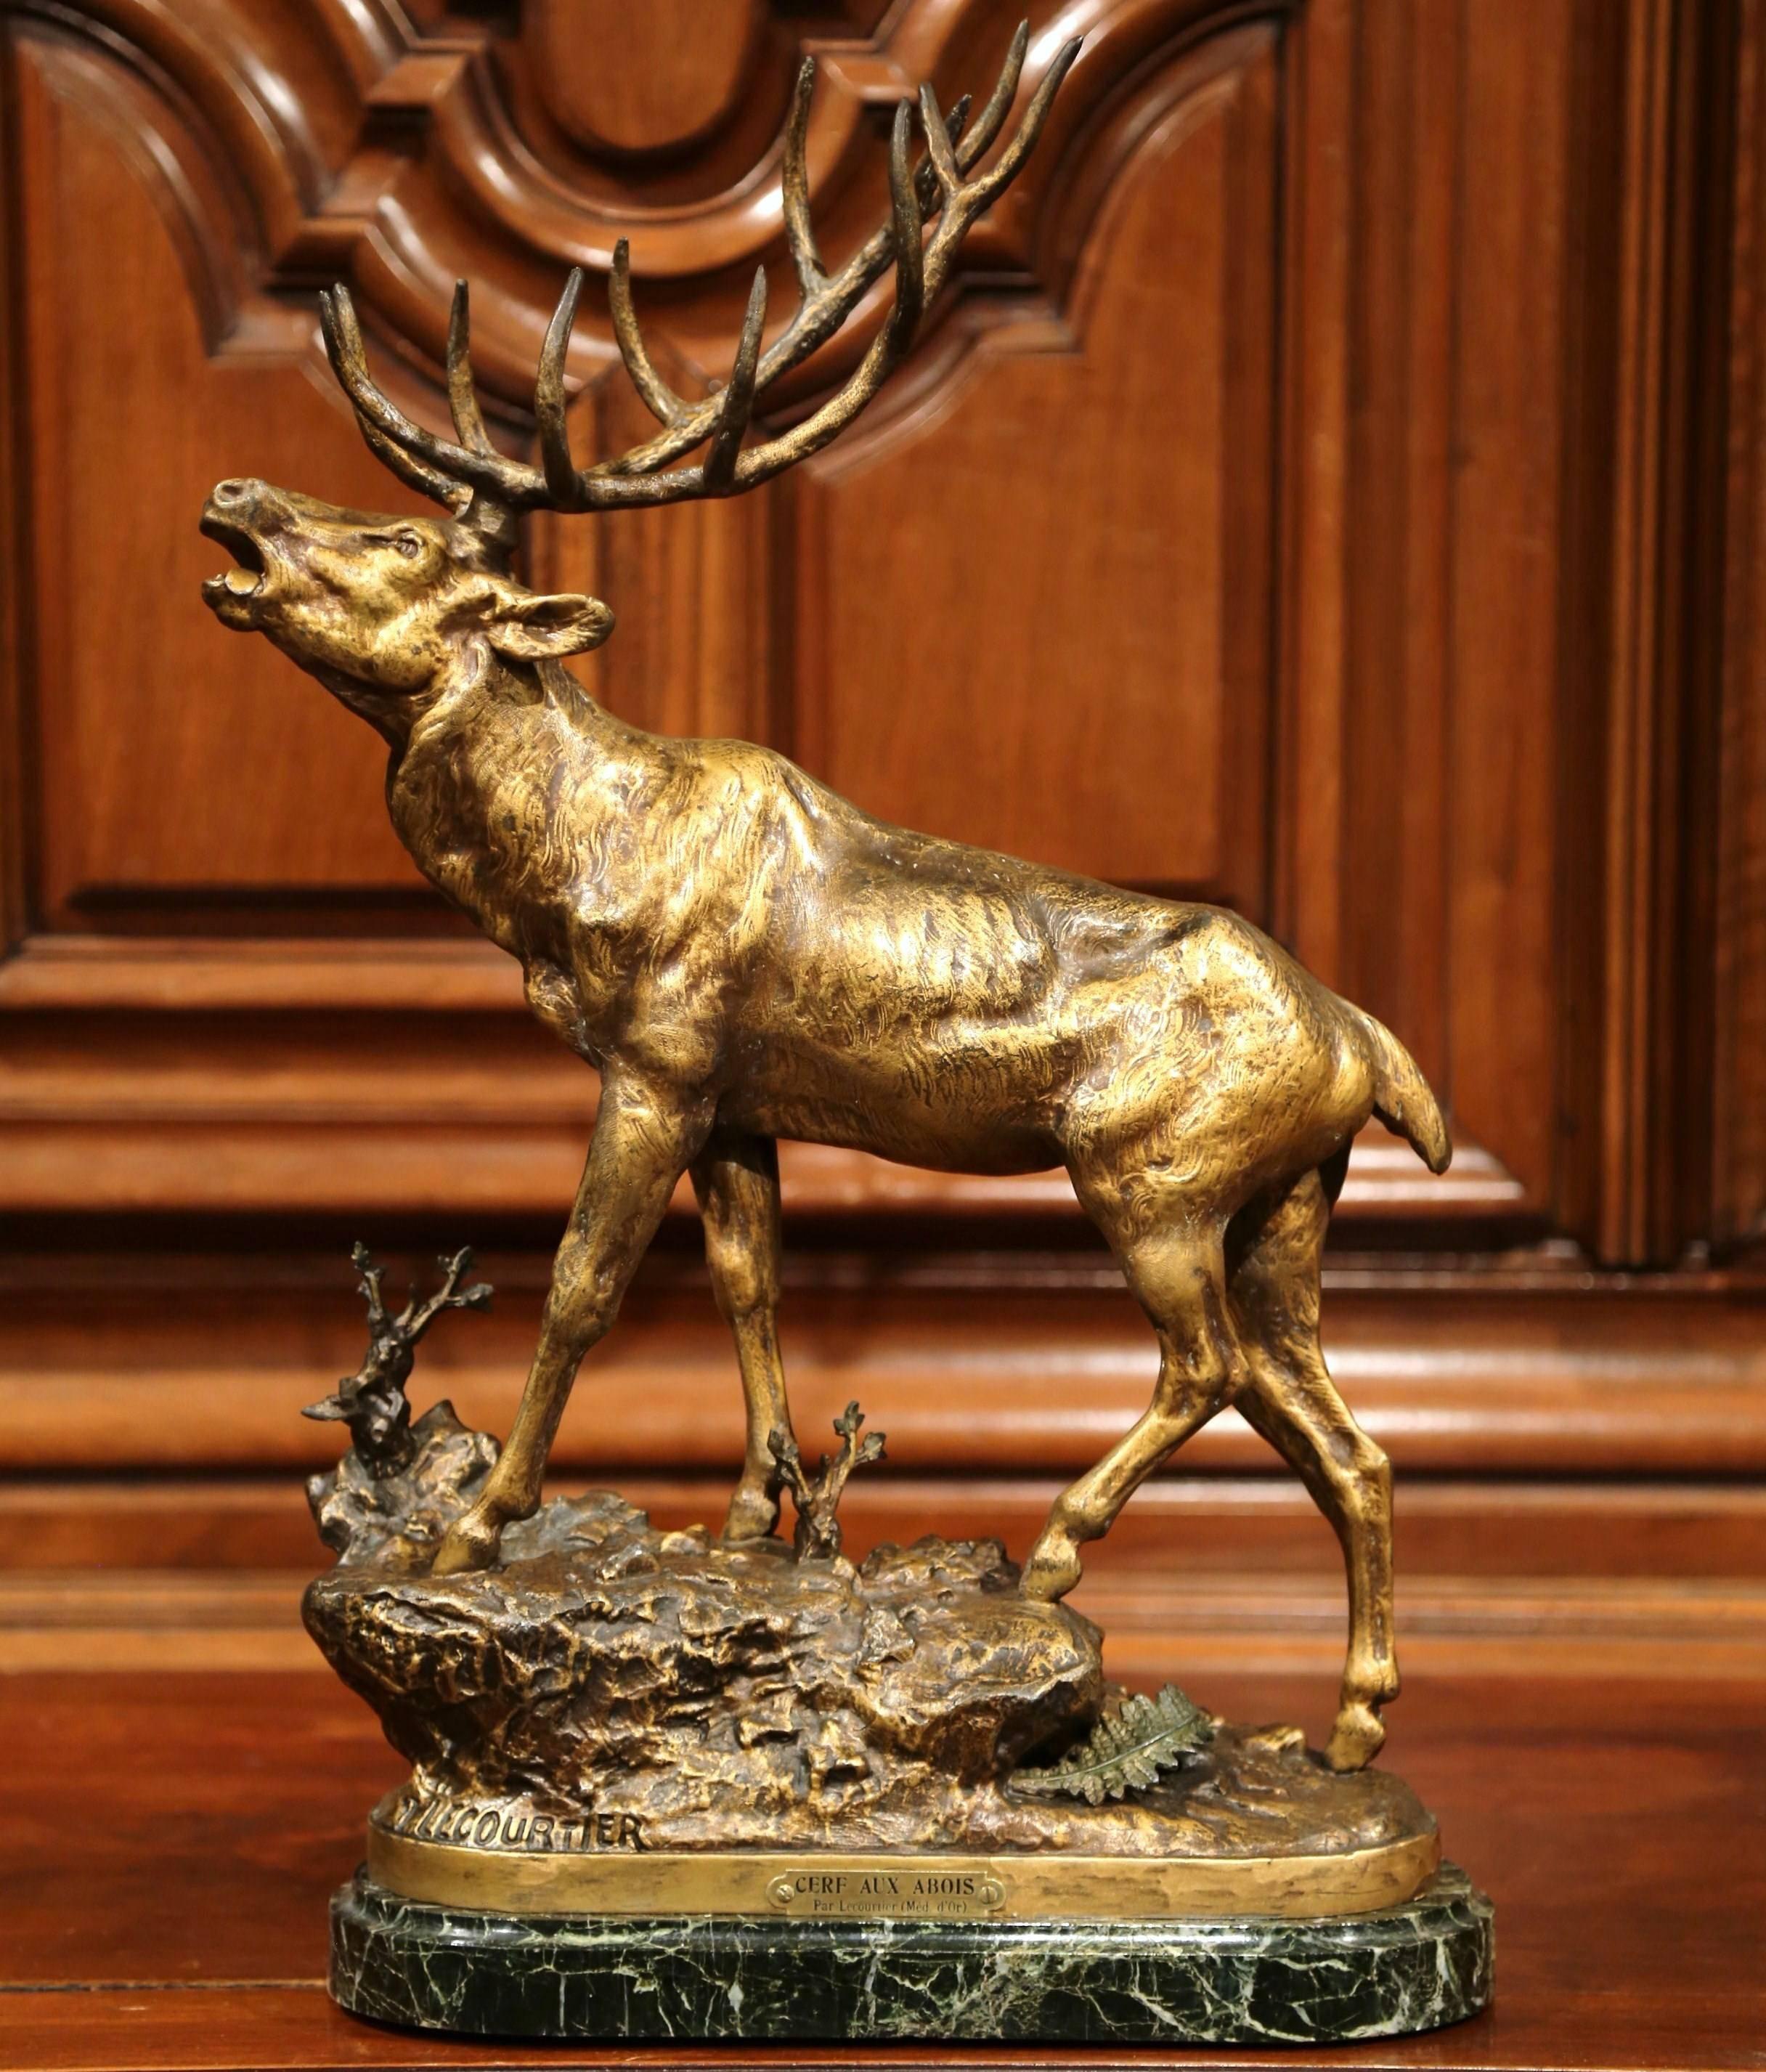 This elegant antique, patinated metal sculpture was created in France, circa 1880. The detailed spelter piece features a realistic deer at bay standing on a black marble top. The large sculpture is signed on the front Lecourtier with a plaque on the